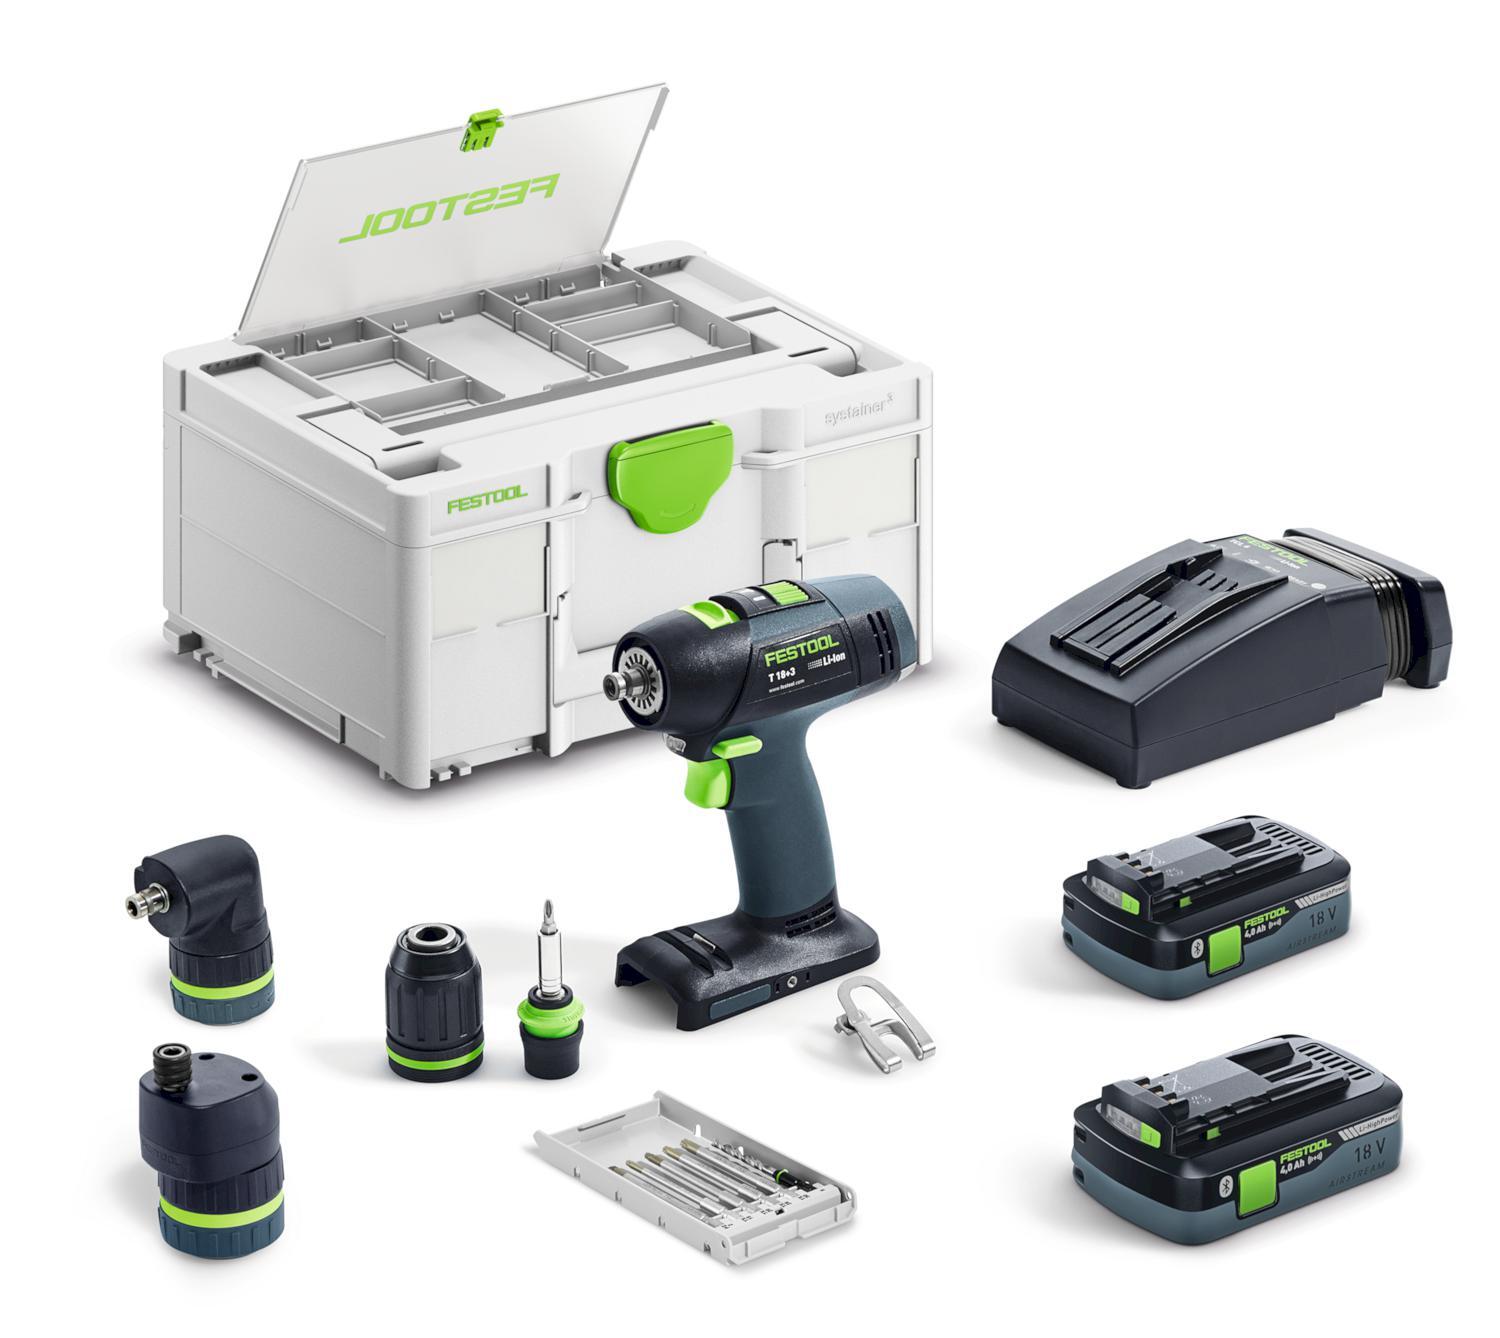 Festool T 18+3 HPC 4,0 I-Set Accu Schroefboormachine 18V 4.0Ah in Systainer - 577609